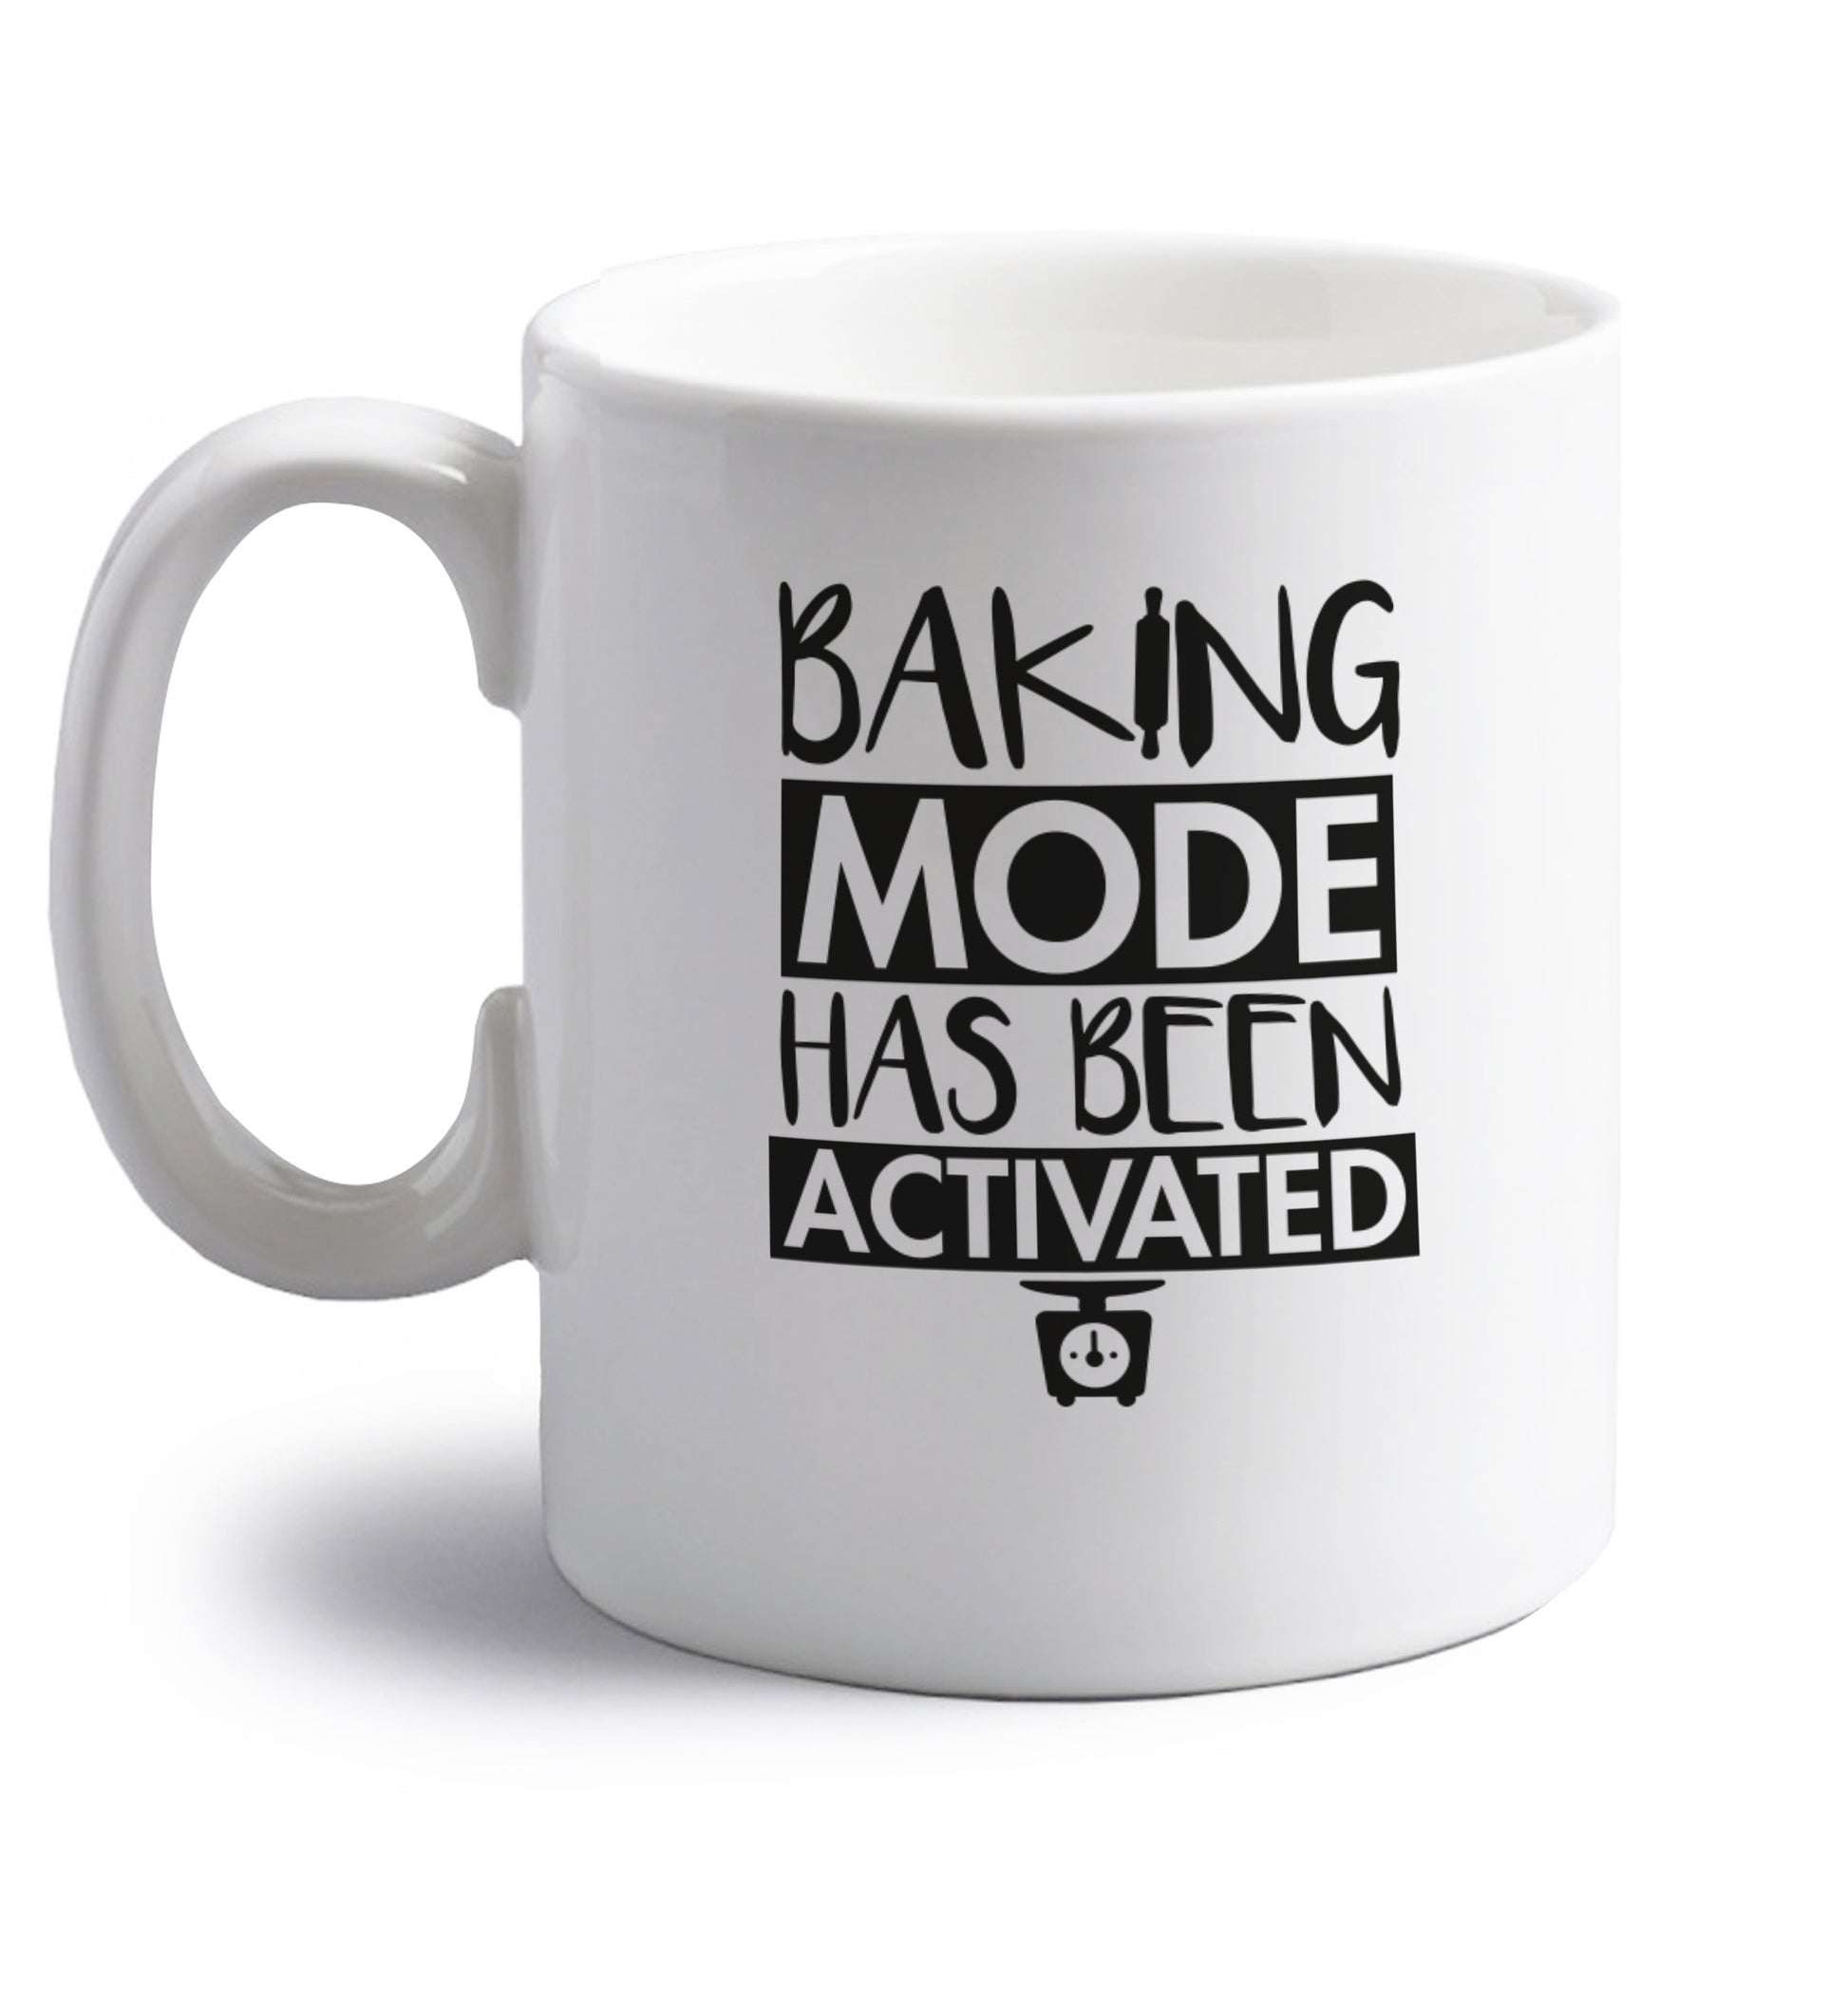 Baking mode has been activated right handed white ceramic mug 